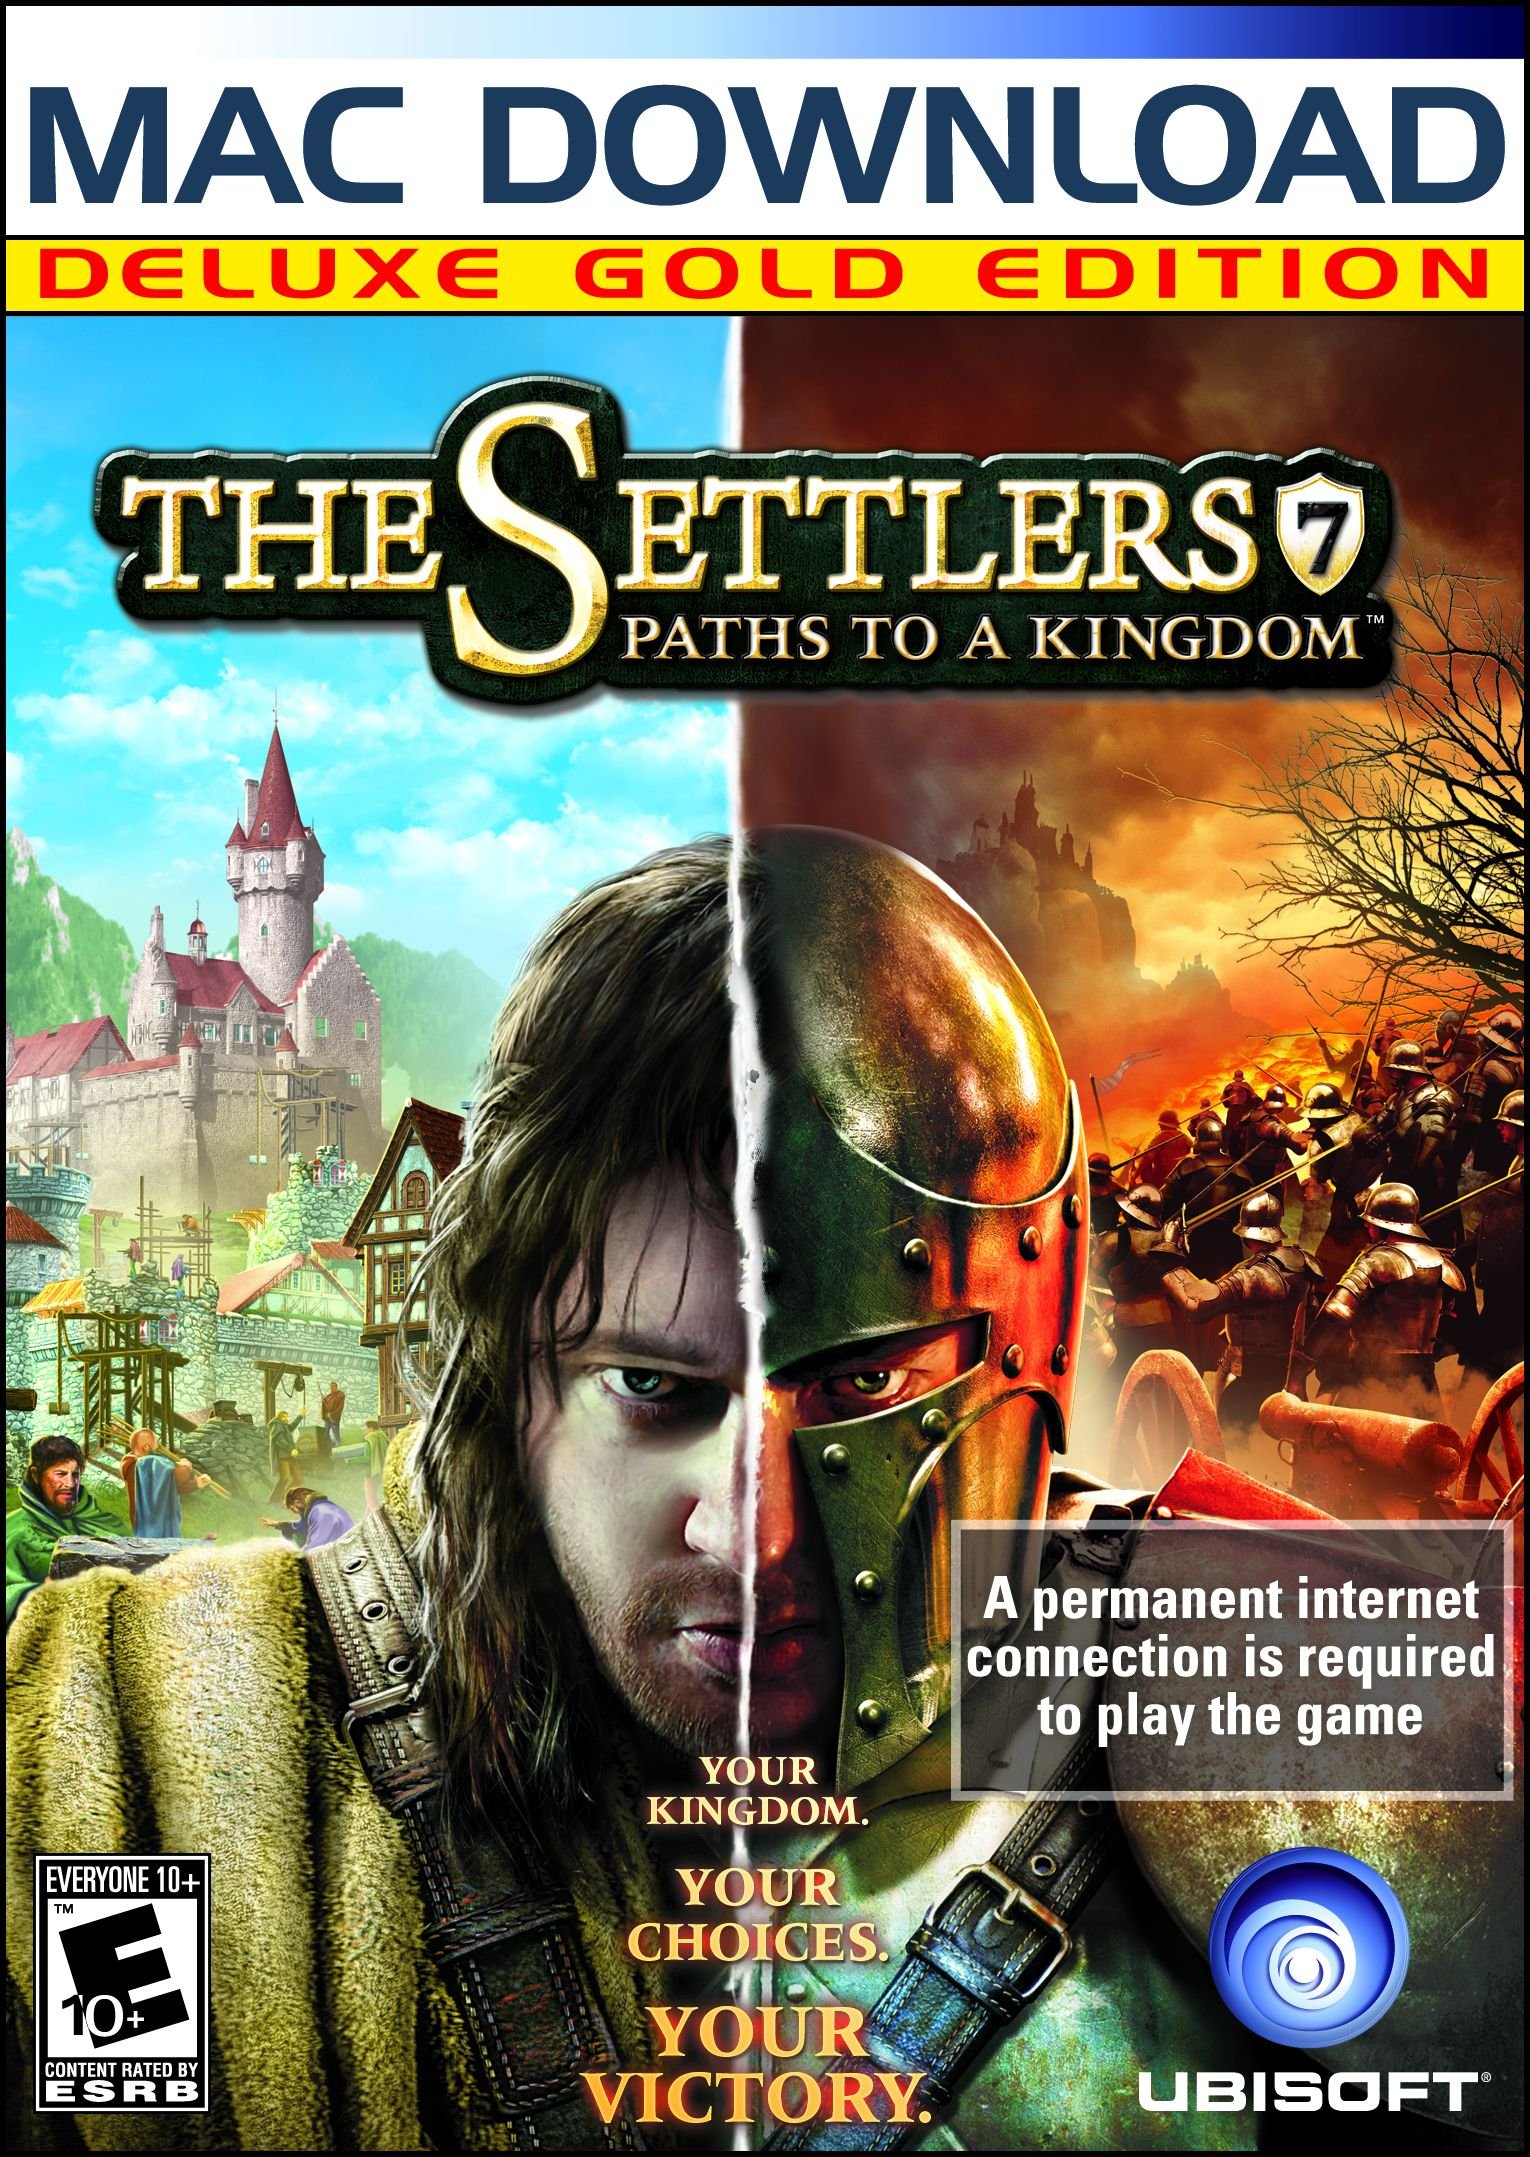 Settlers 7 Paths to a Kingdom: Deluxe Gold Edition [Download]